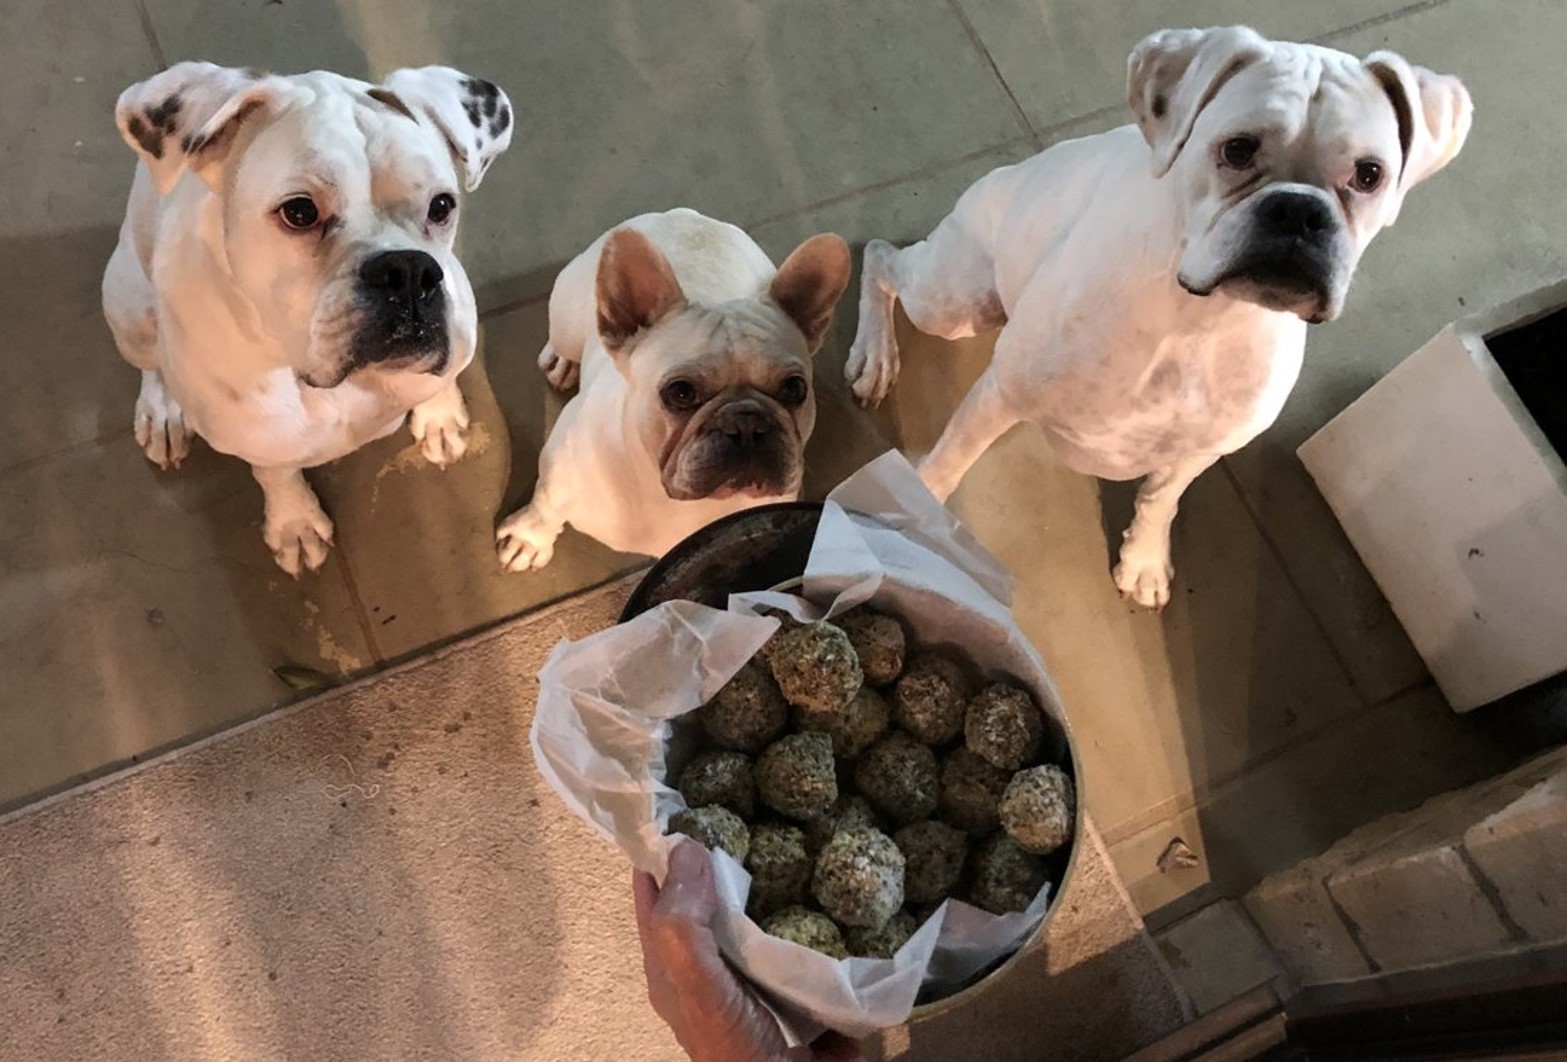 Dogs waiting for their Doggy Daily Bliss Balls treats.